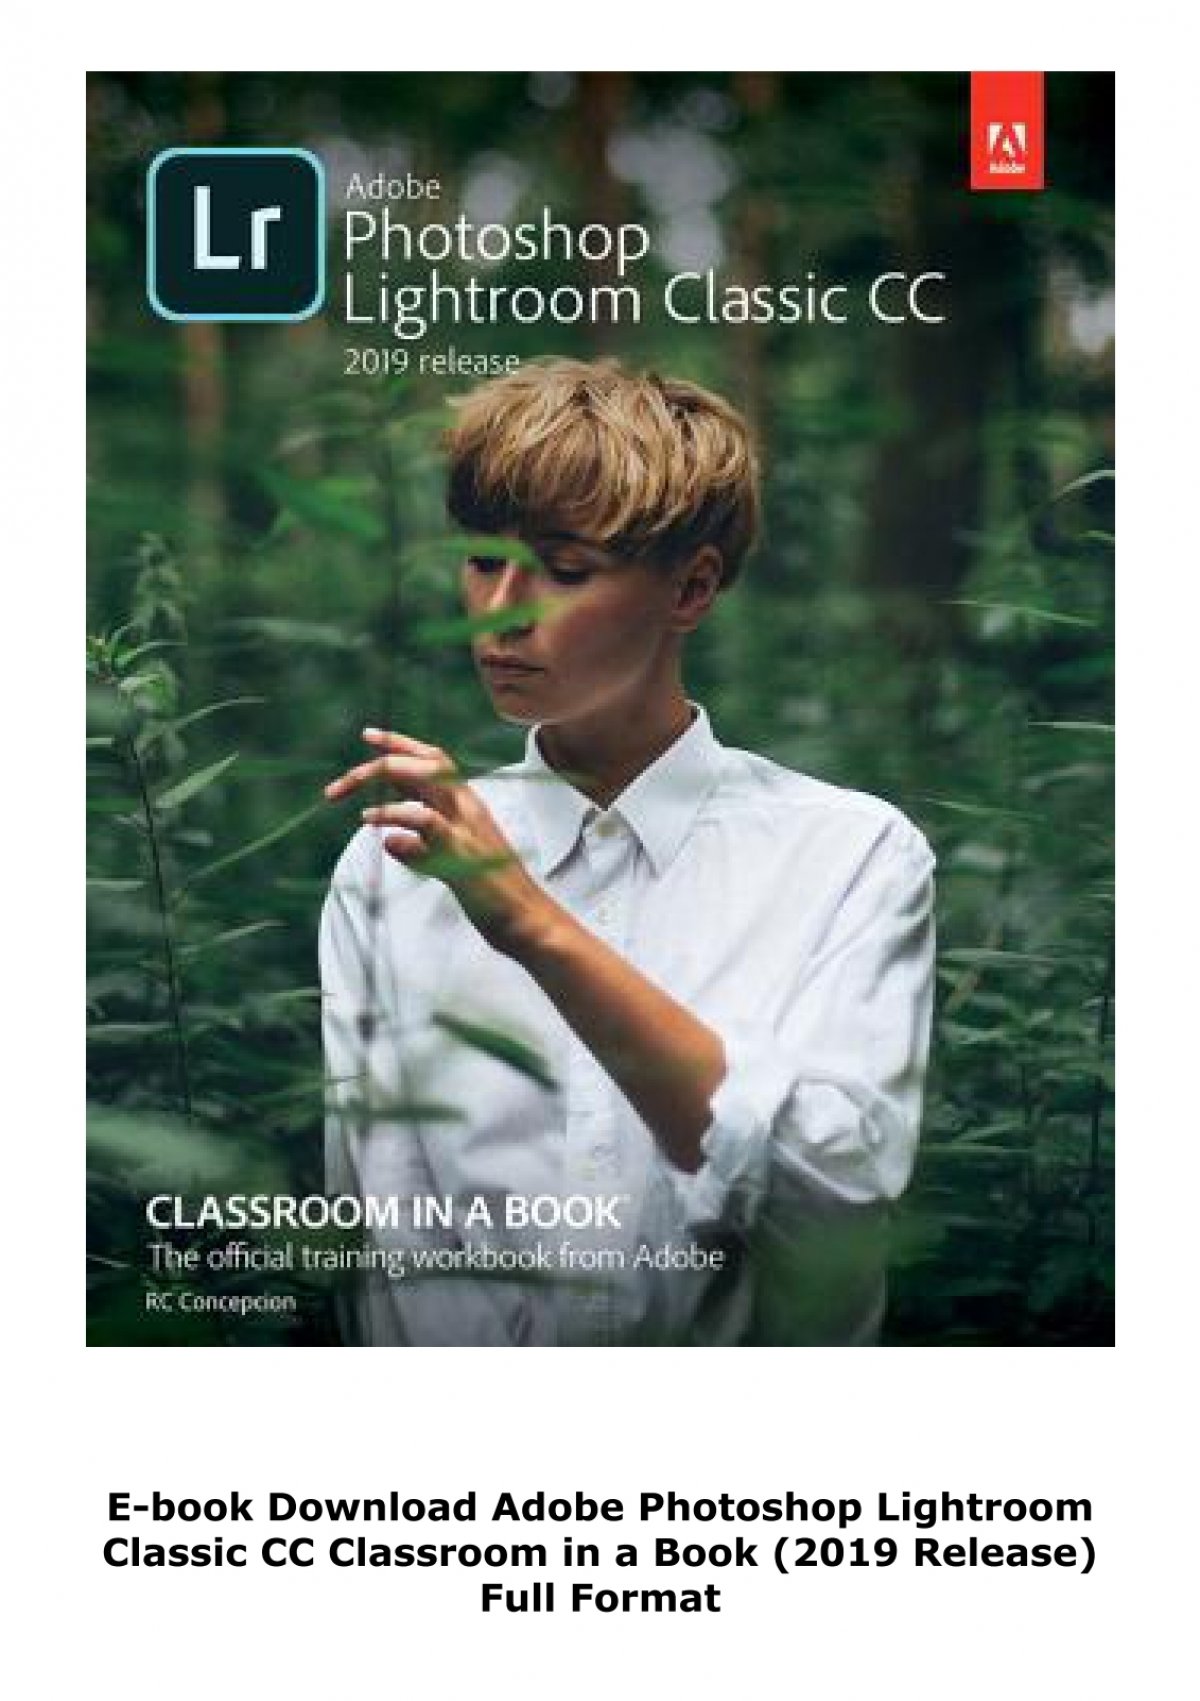 adobe photoshop cc classroom in a book 2019 download